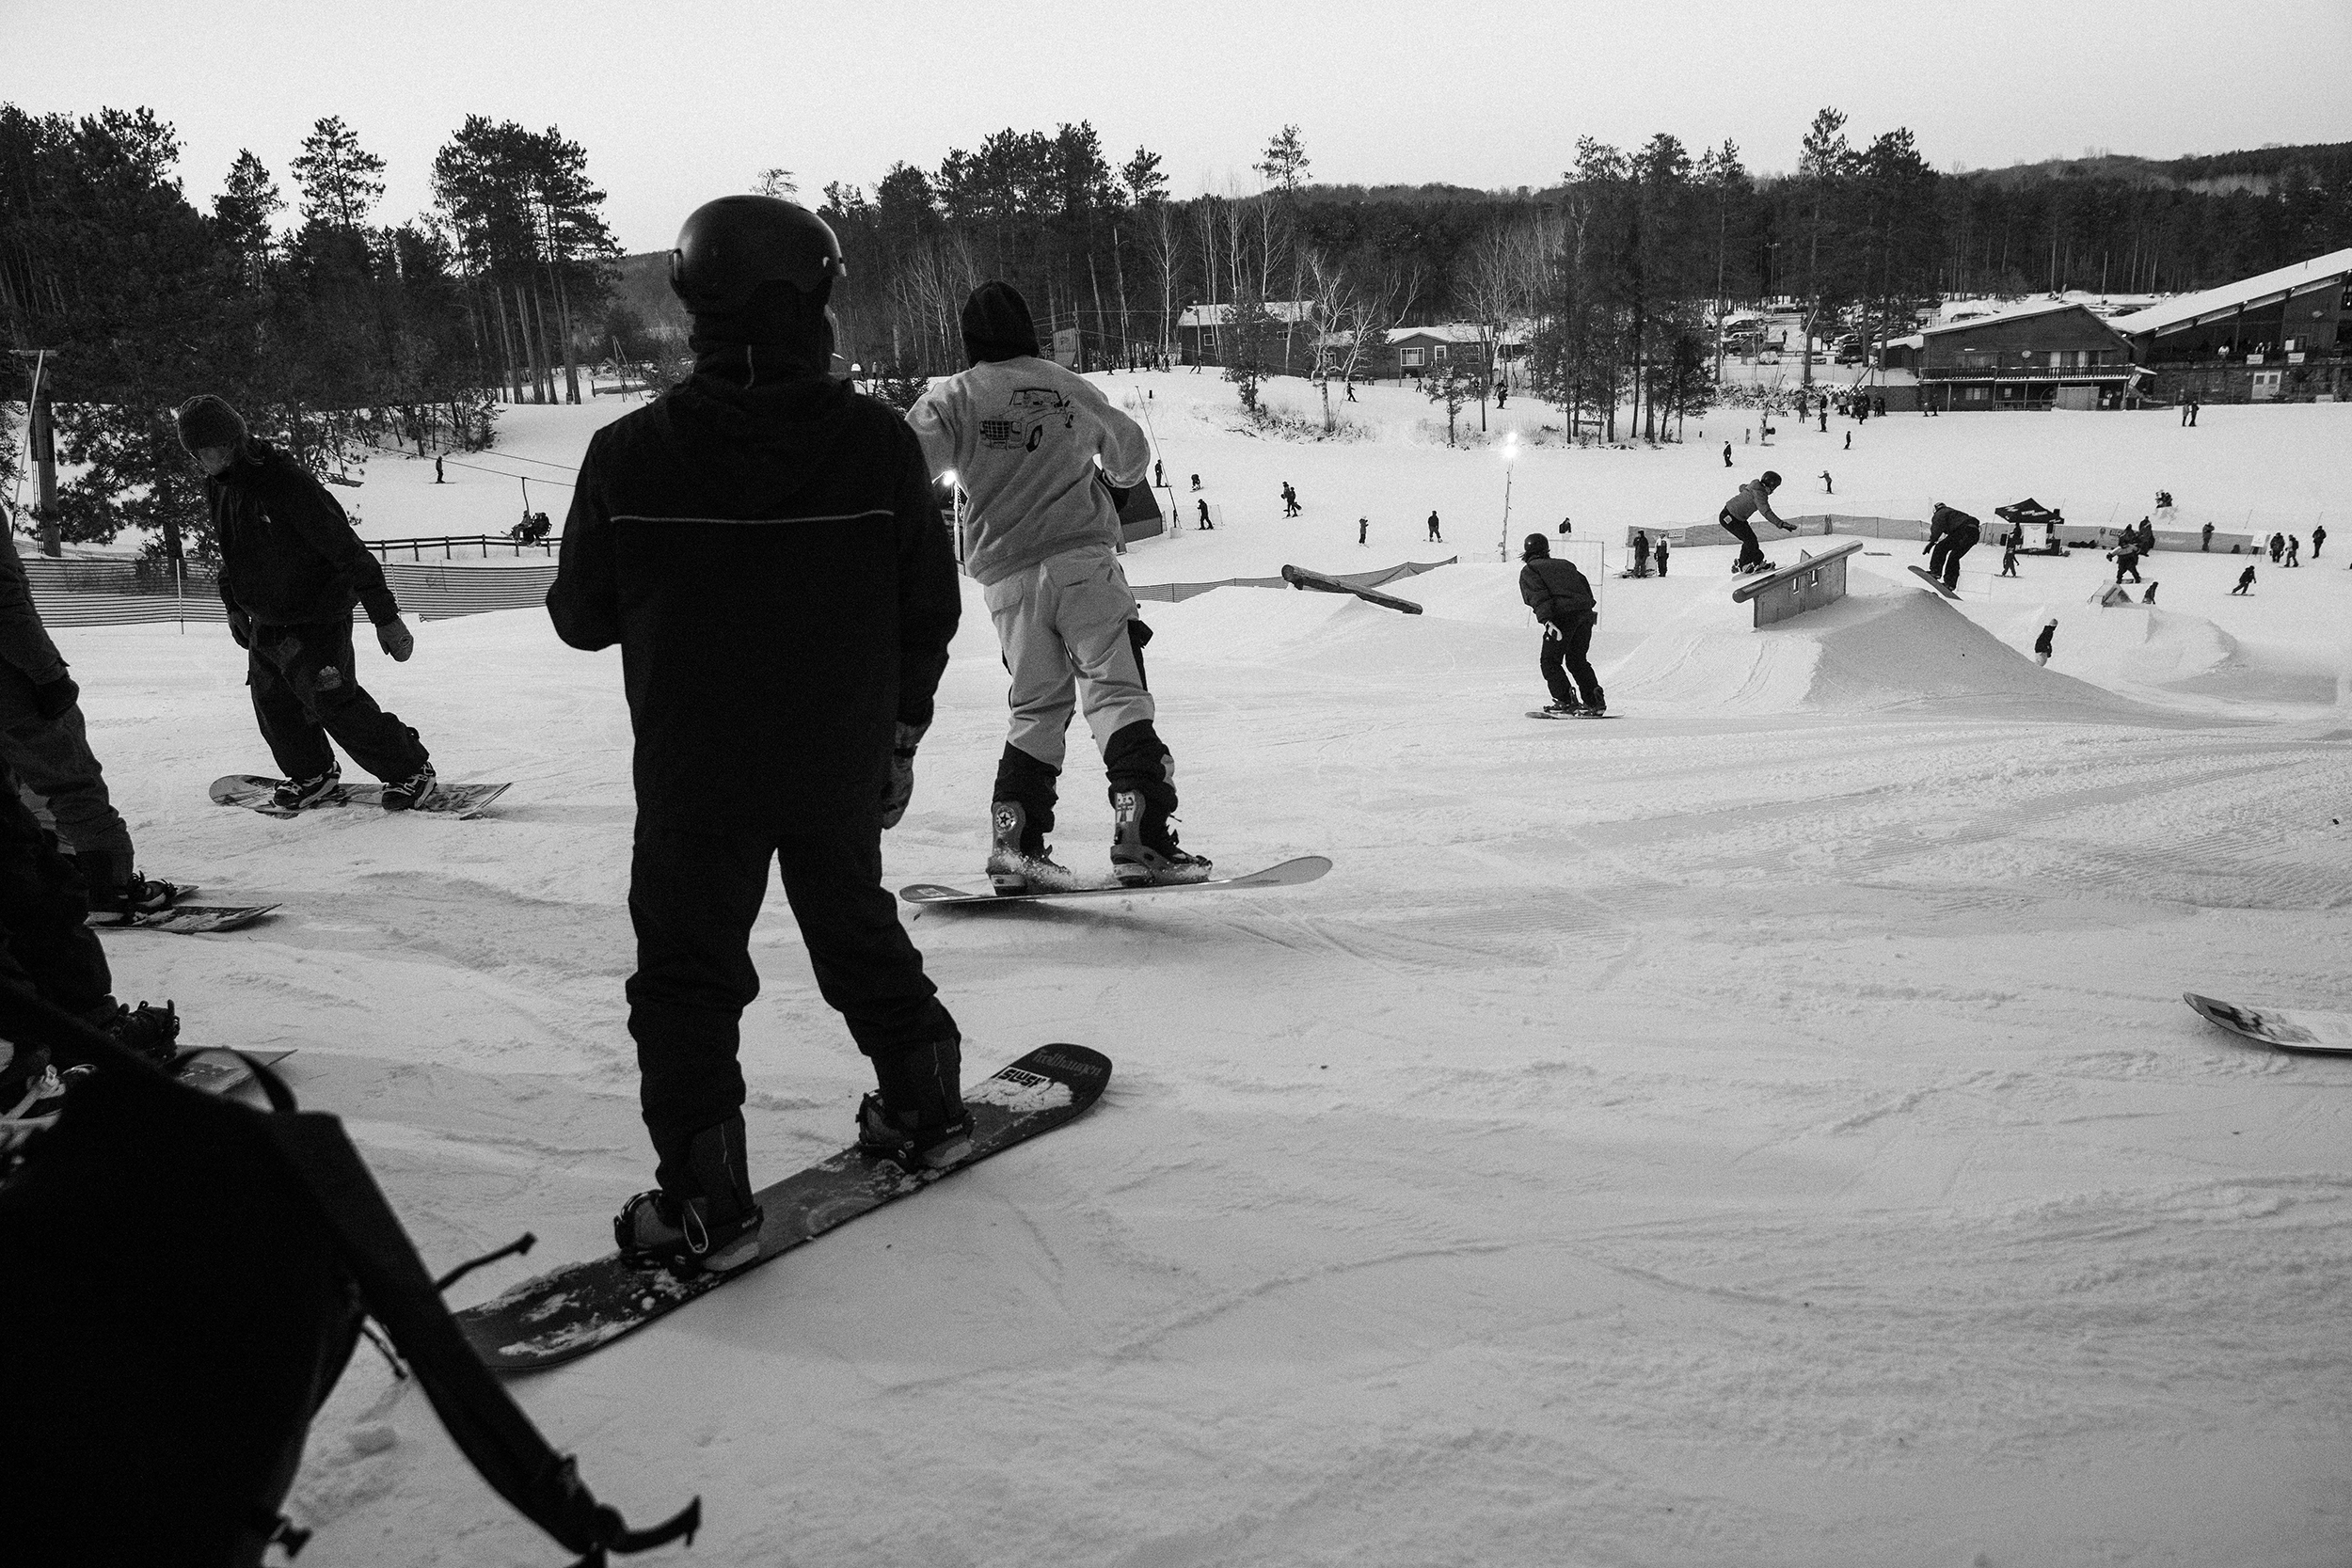 Riders warm up at Lord of the Ropes snowboard contest at Trollhaugen in Wisconsin